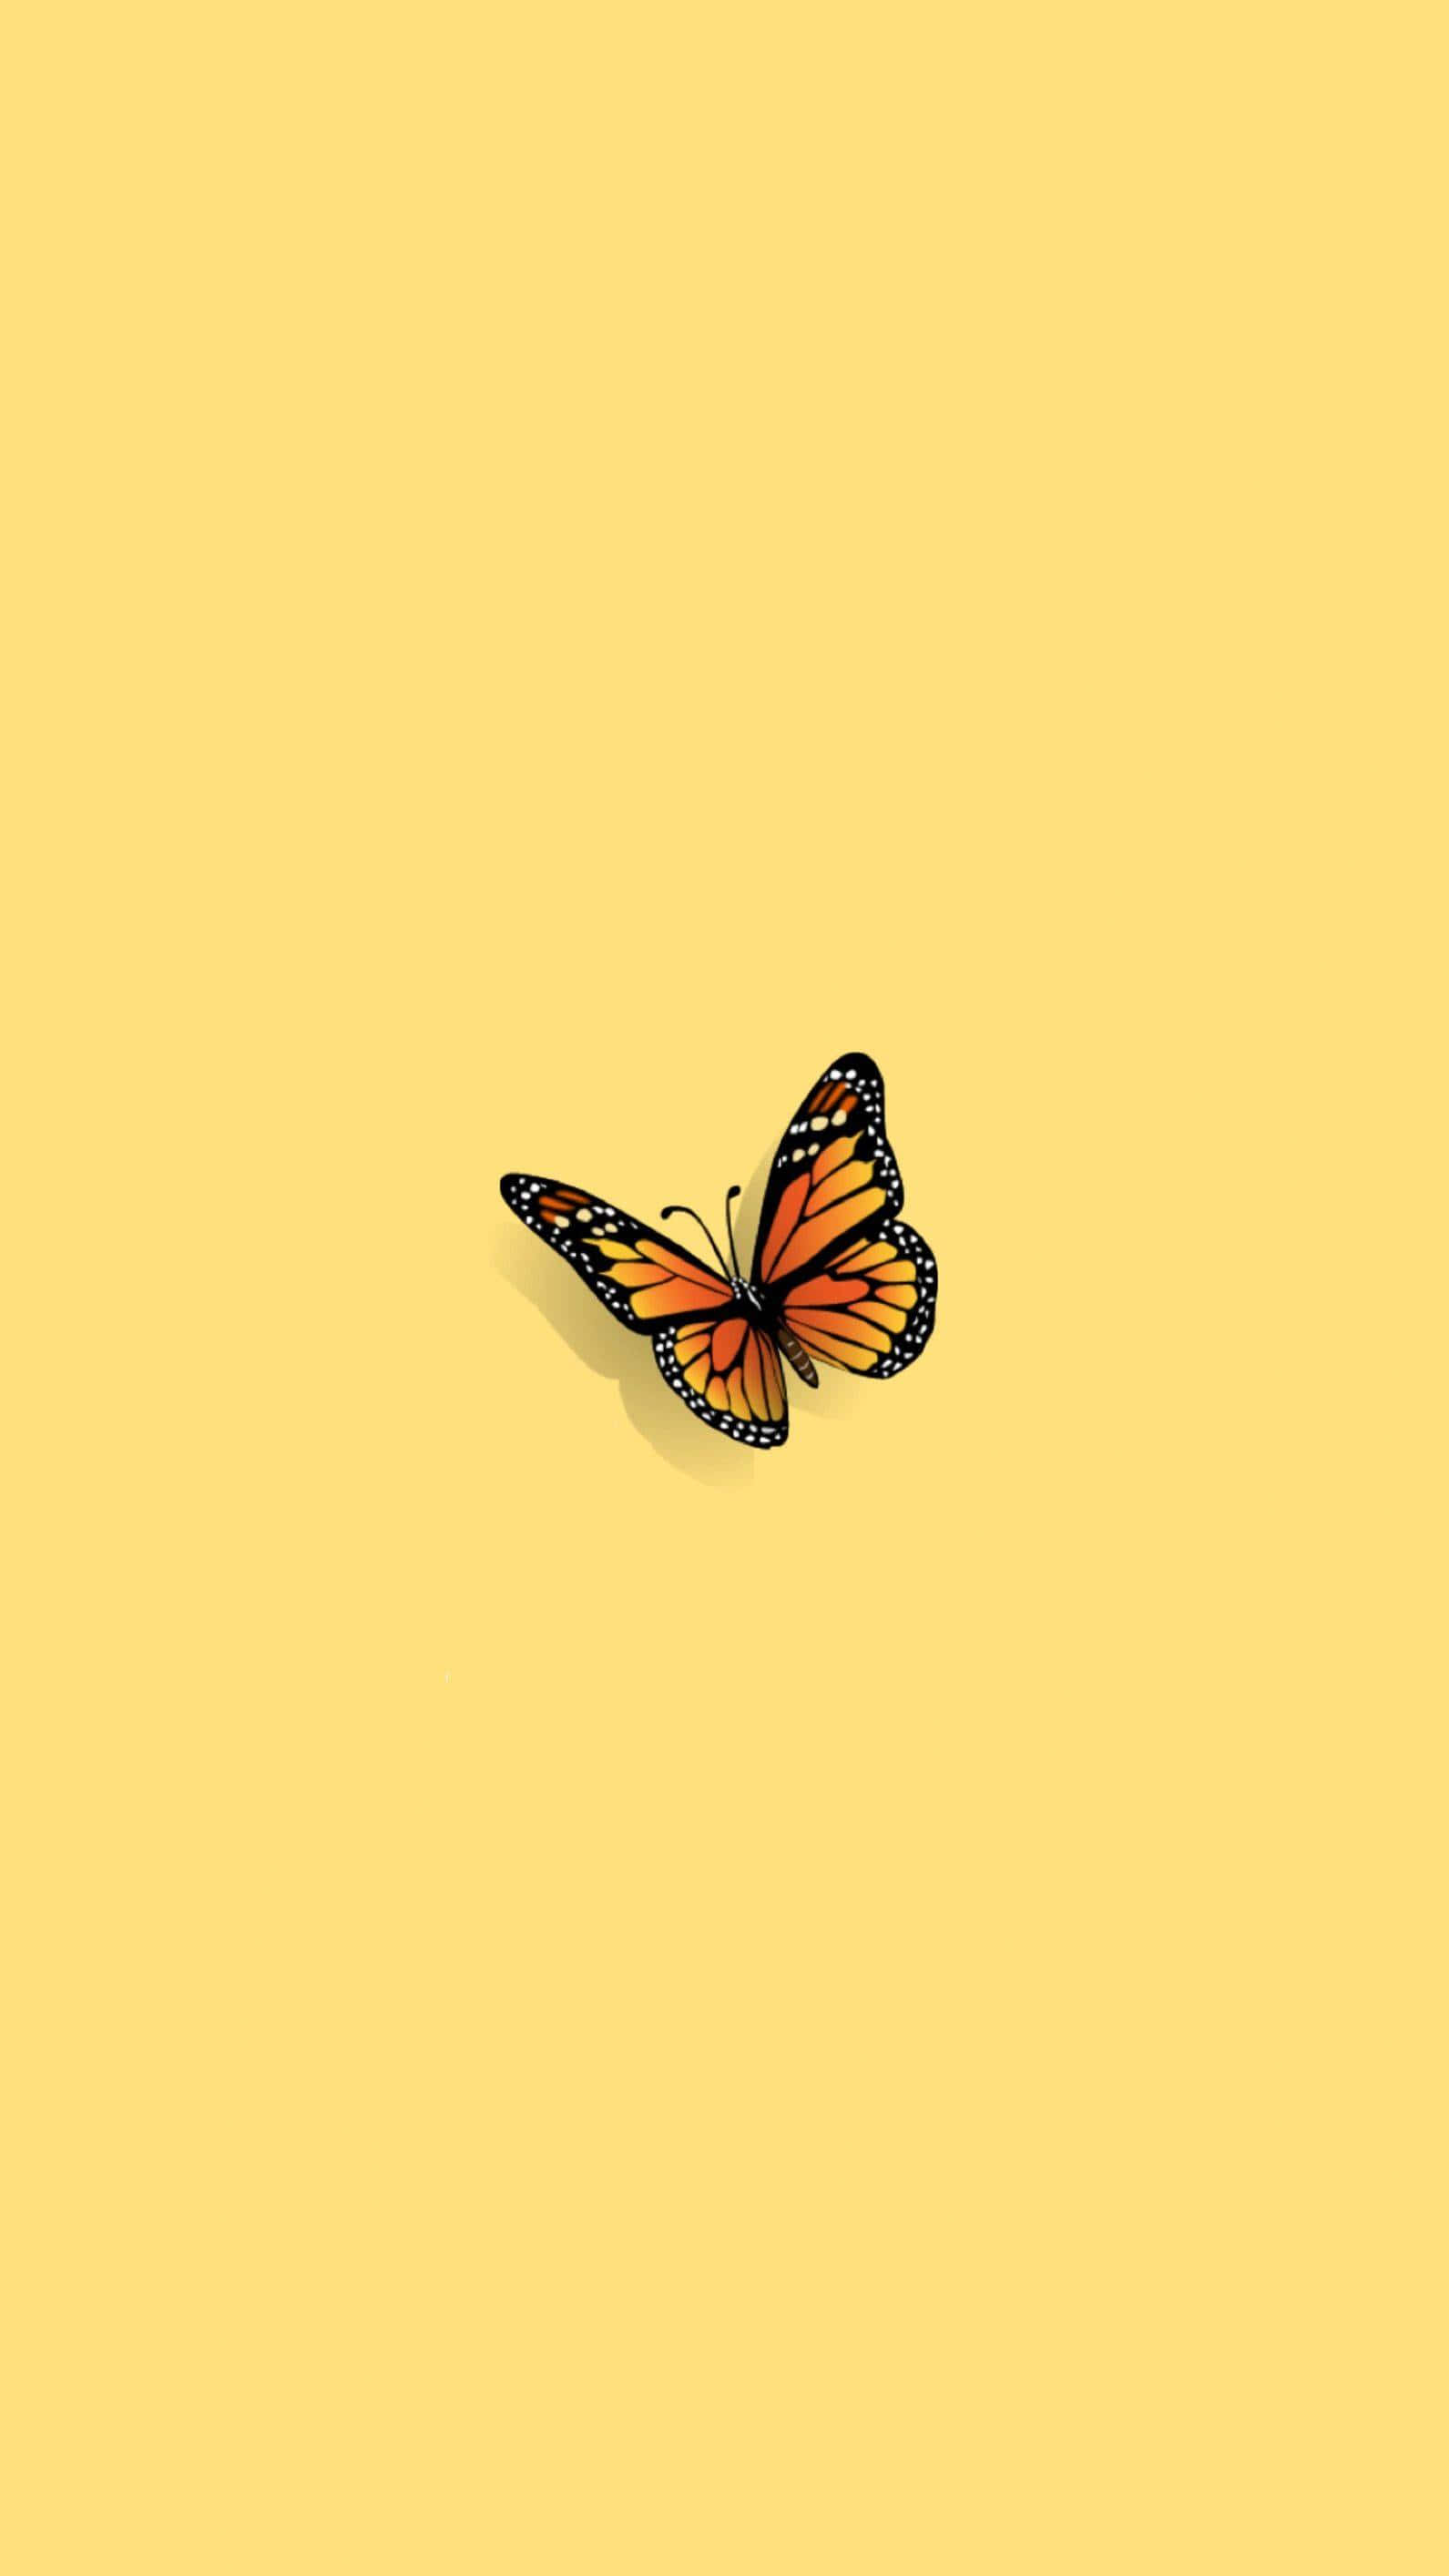 Image  A beautiful yellow butterfly perched on a vibrant flower Wallpaper